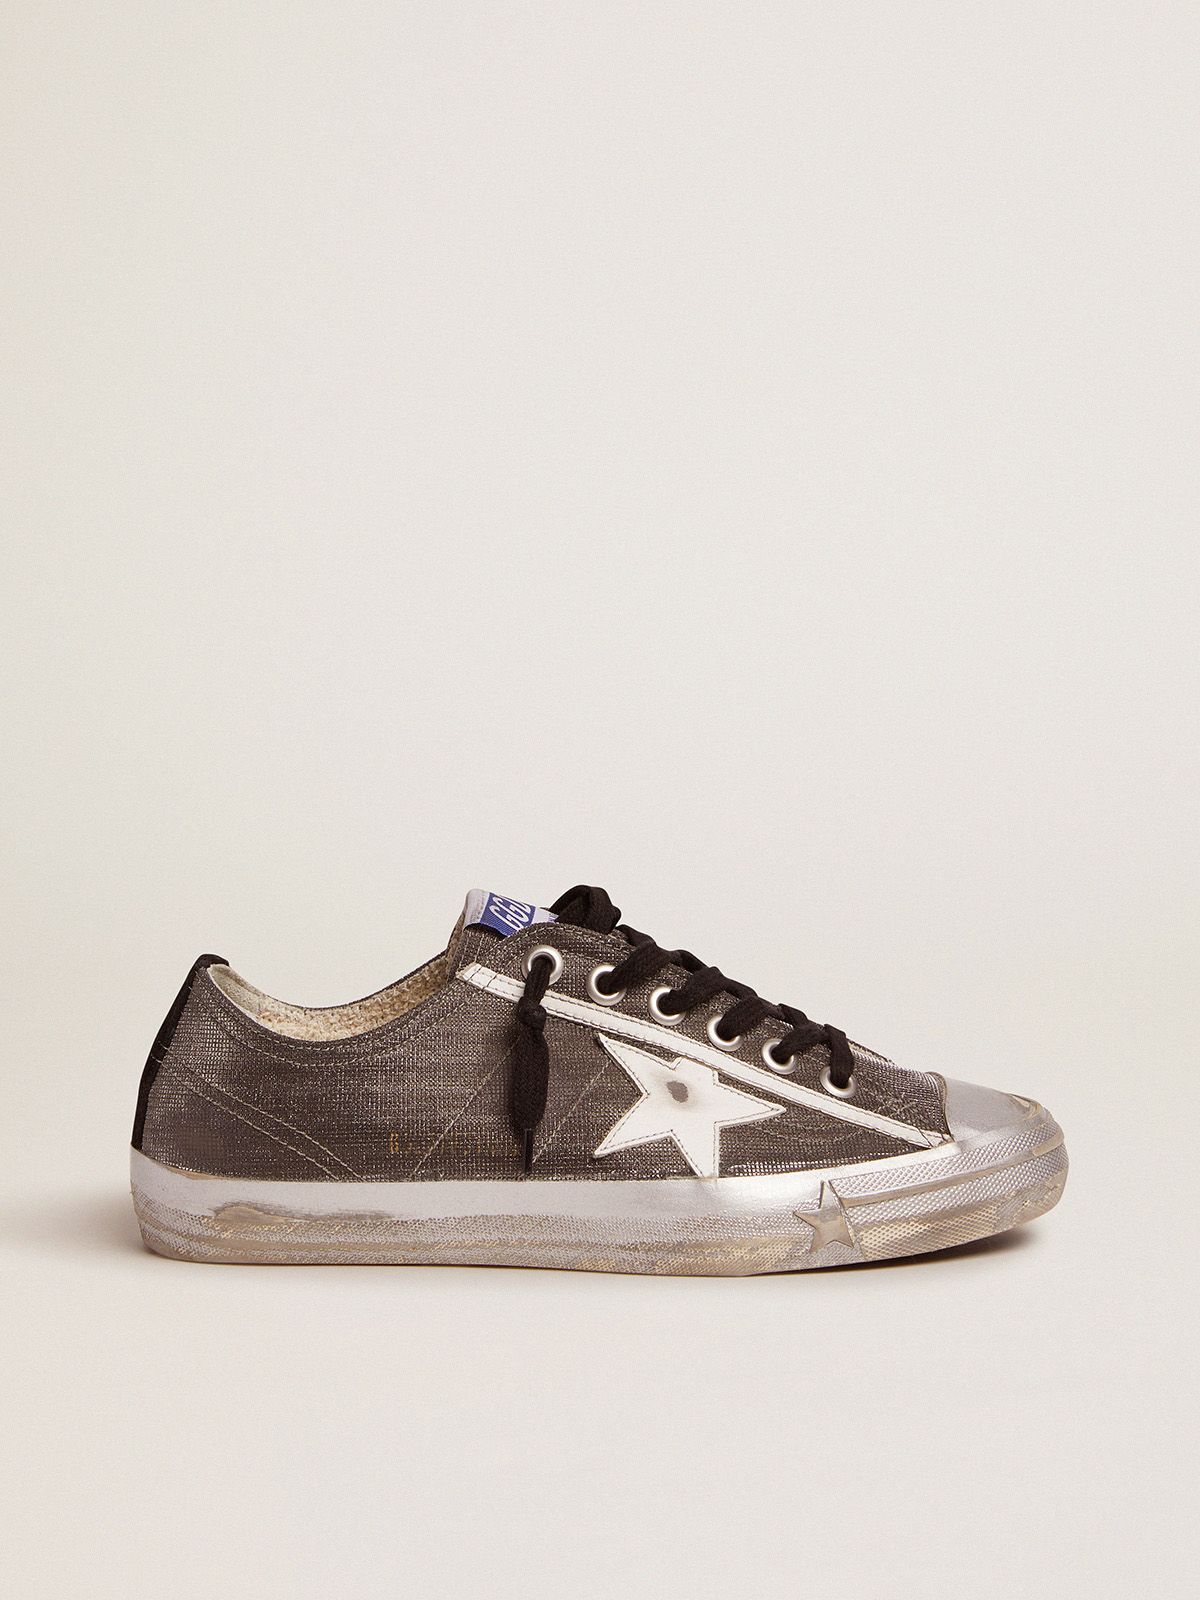 golden goose sneakers with pattern V-Star star Dark LTD gray and checkered white